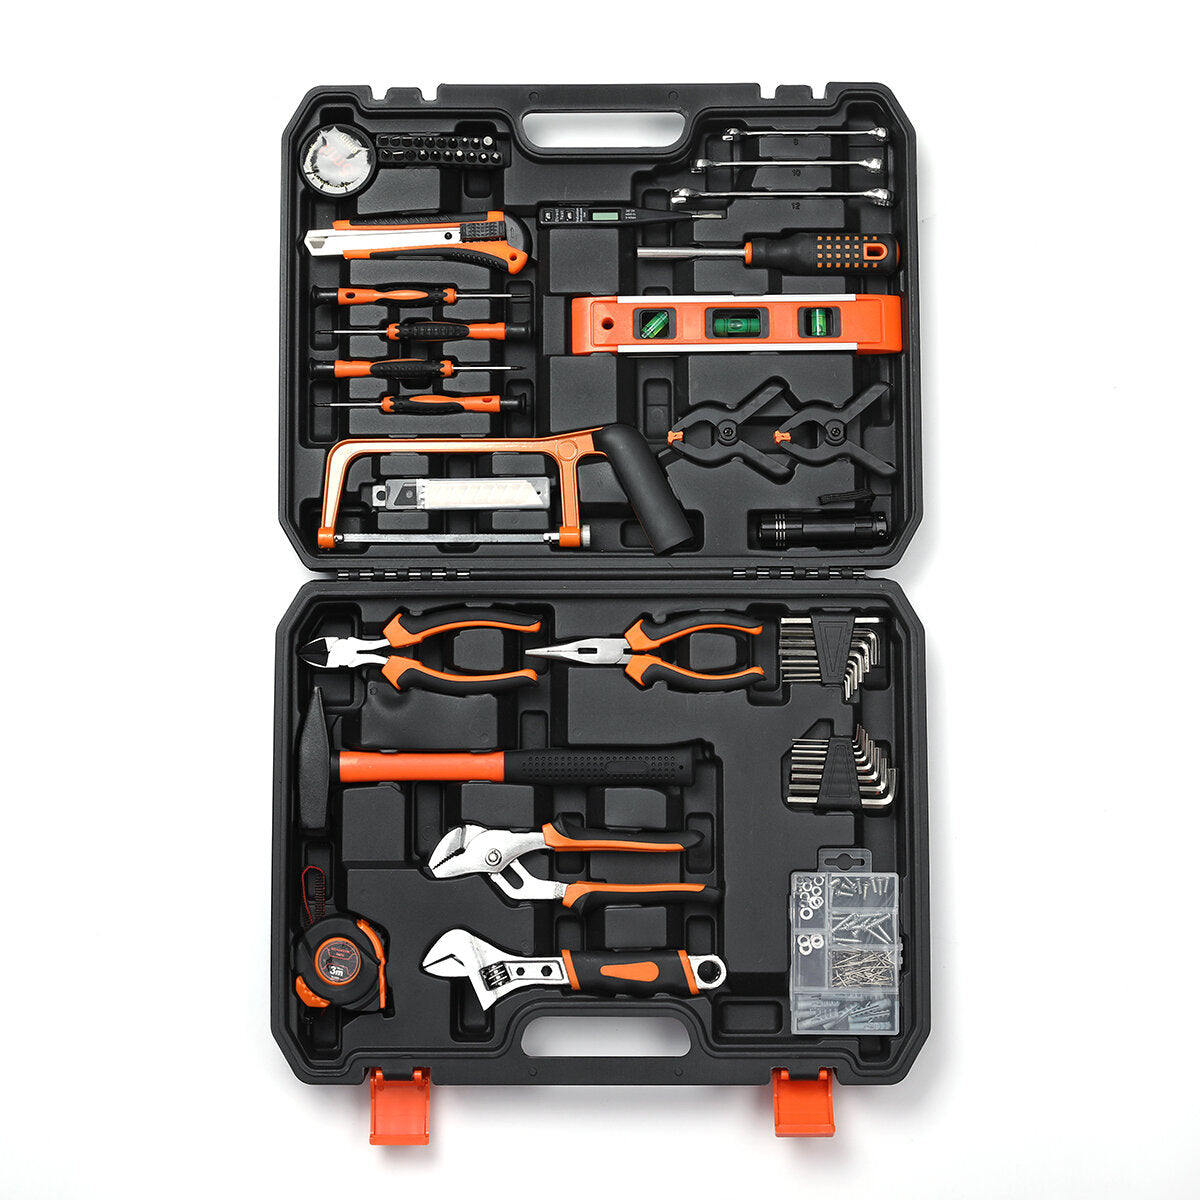 topshak ts-ch1 218 piece socket wrench auto repair tool mixed tool set hand tool kit with plastic toolbox storage case